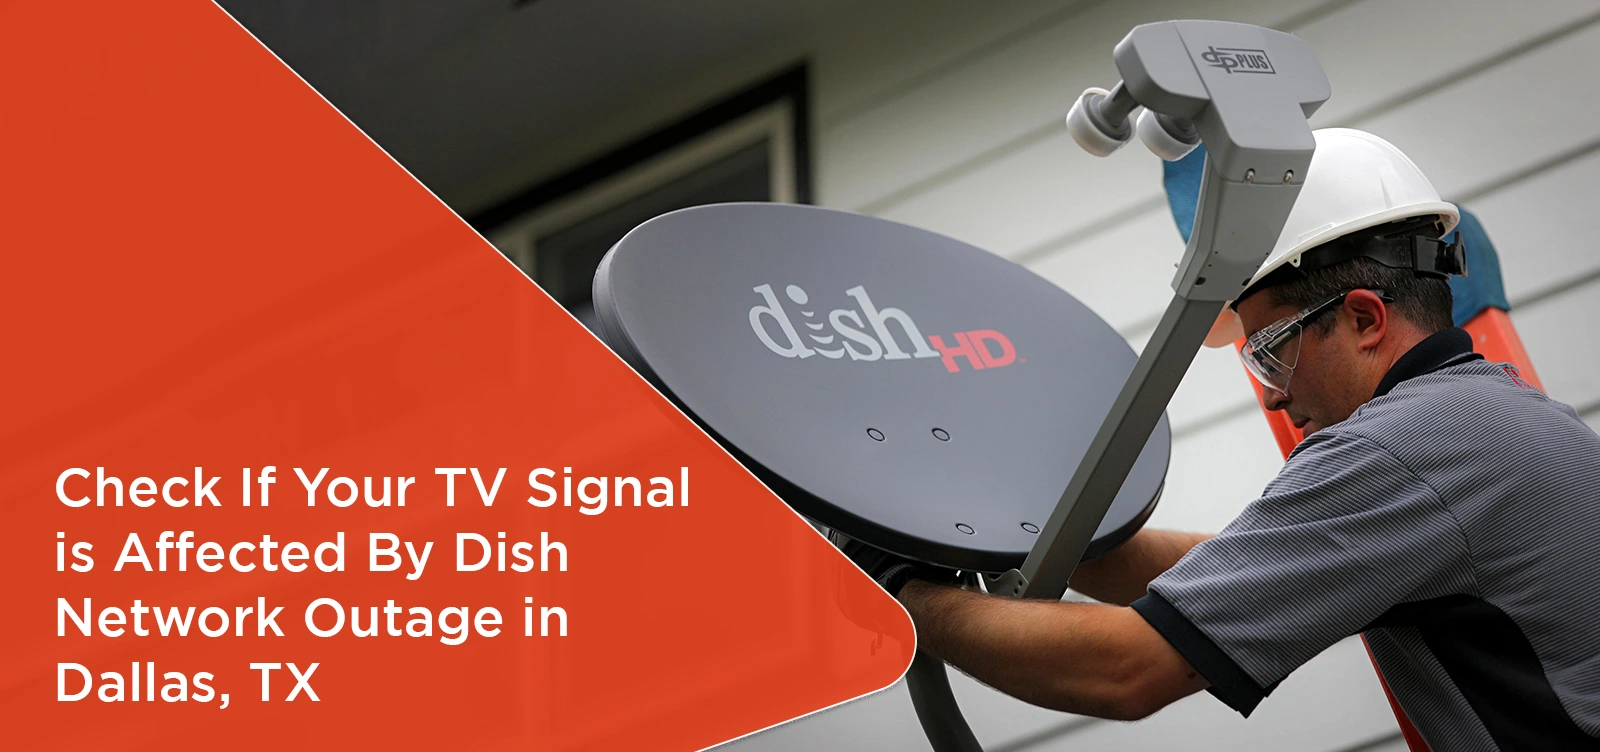 Check If Your TV Signal is Affected By Dish Network Outage in Dallas, TX